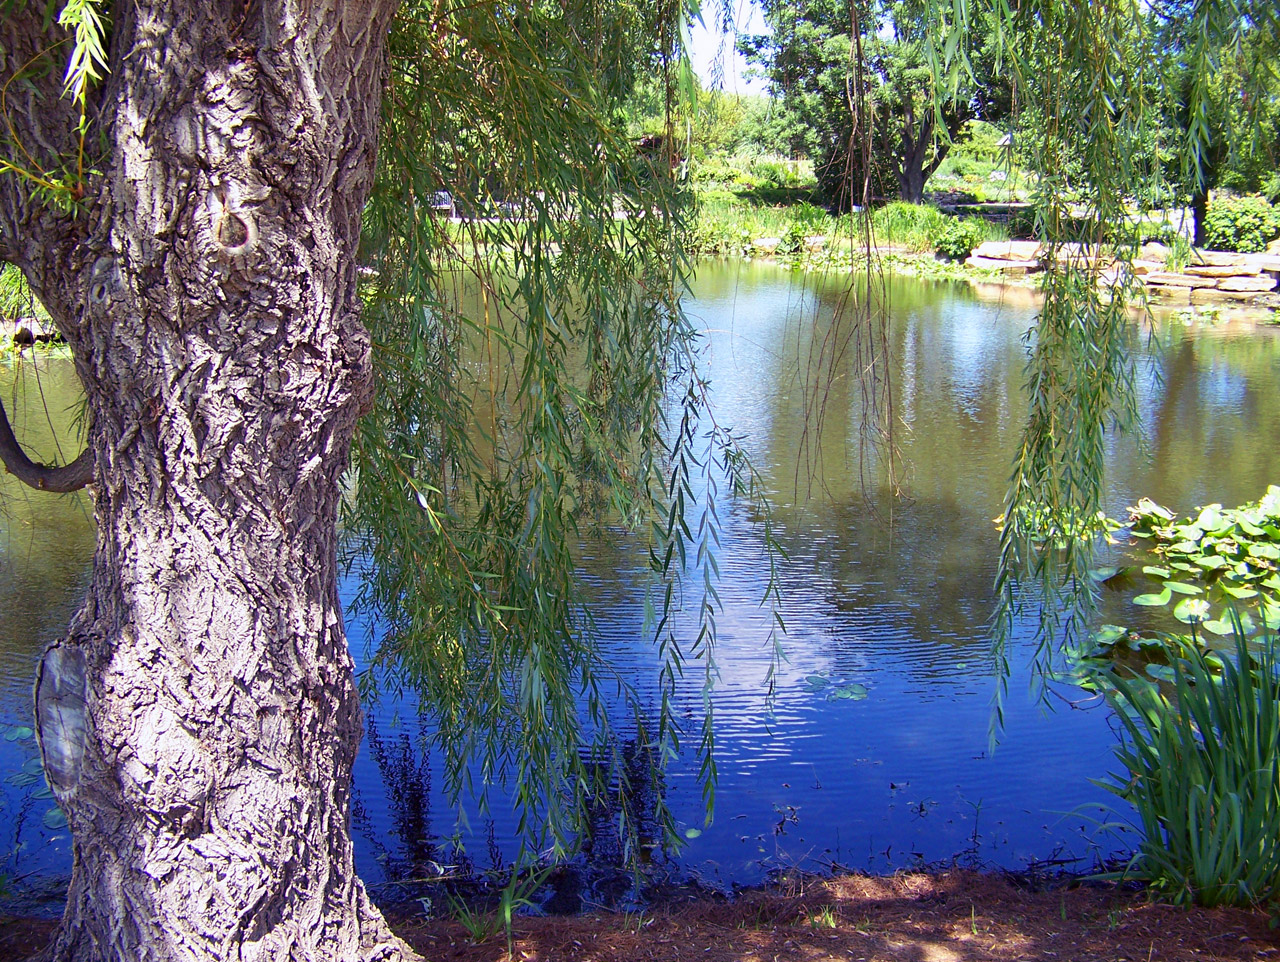 Weeping willow tree beside a pond